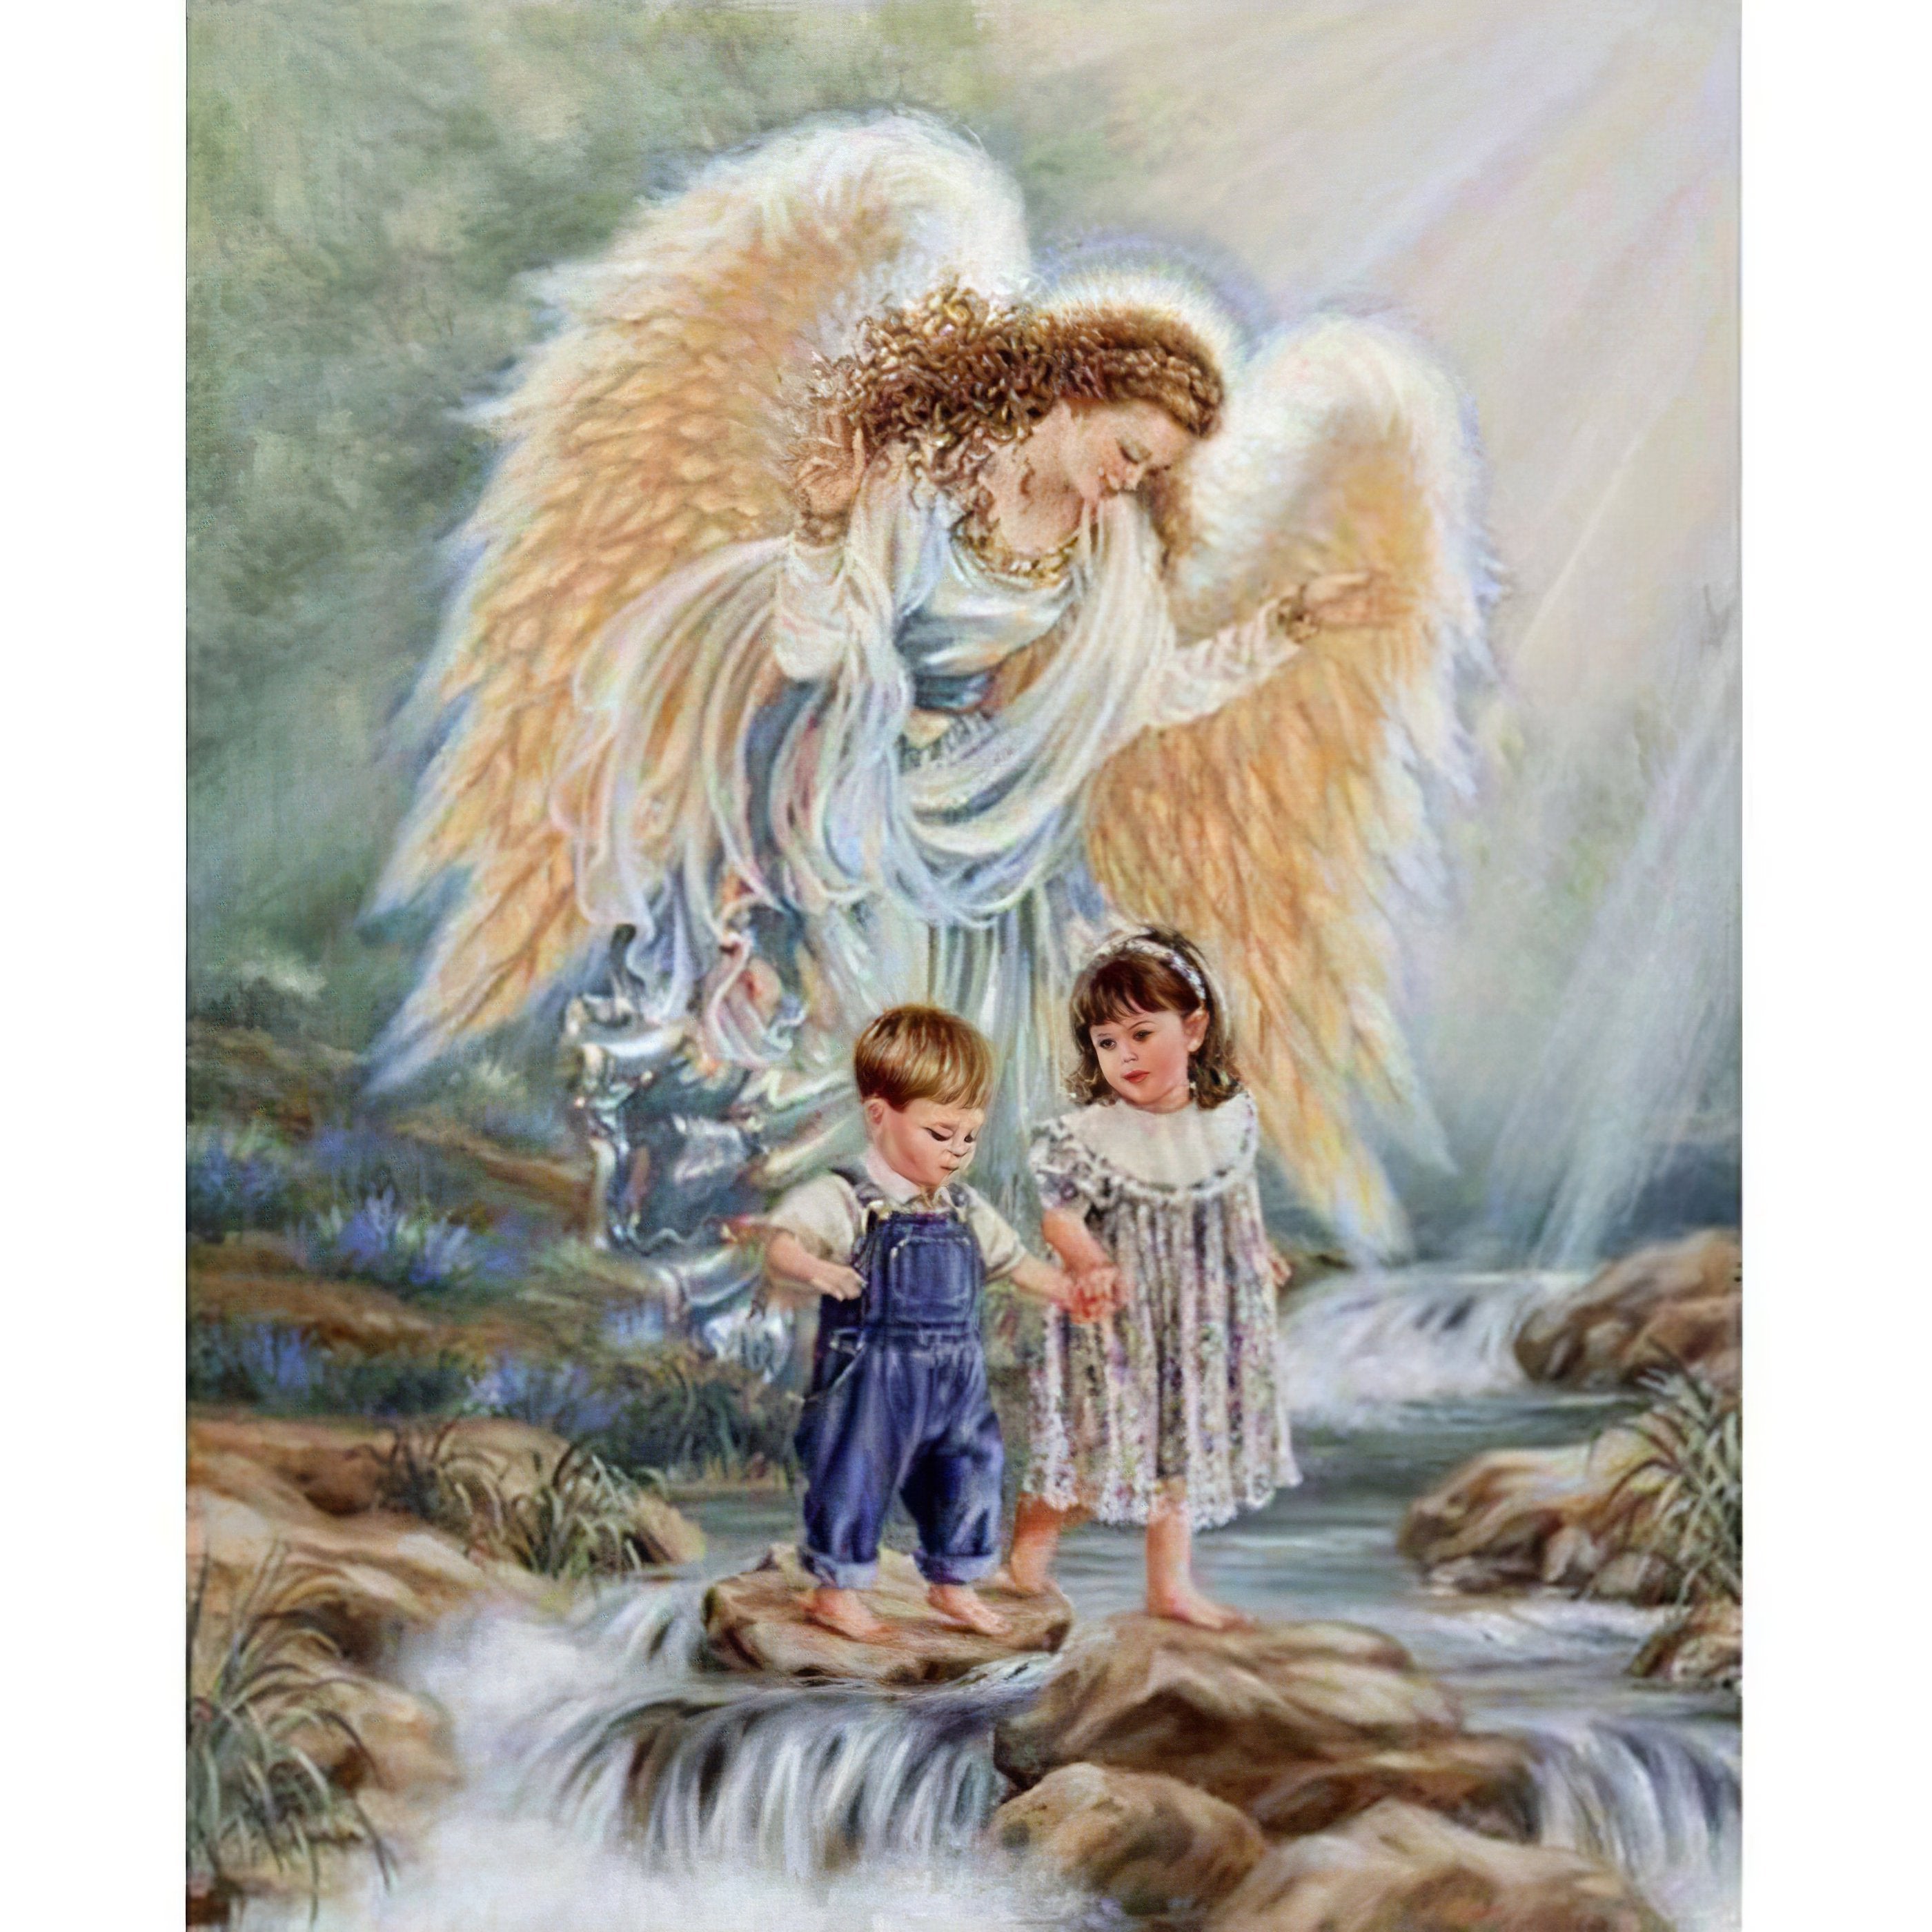 Marvel at the ethereal Girl Angel Over Waterfall scene.Girl Angel Over Waterfall - Diamondartlove